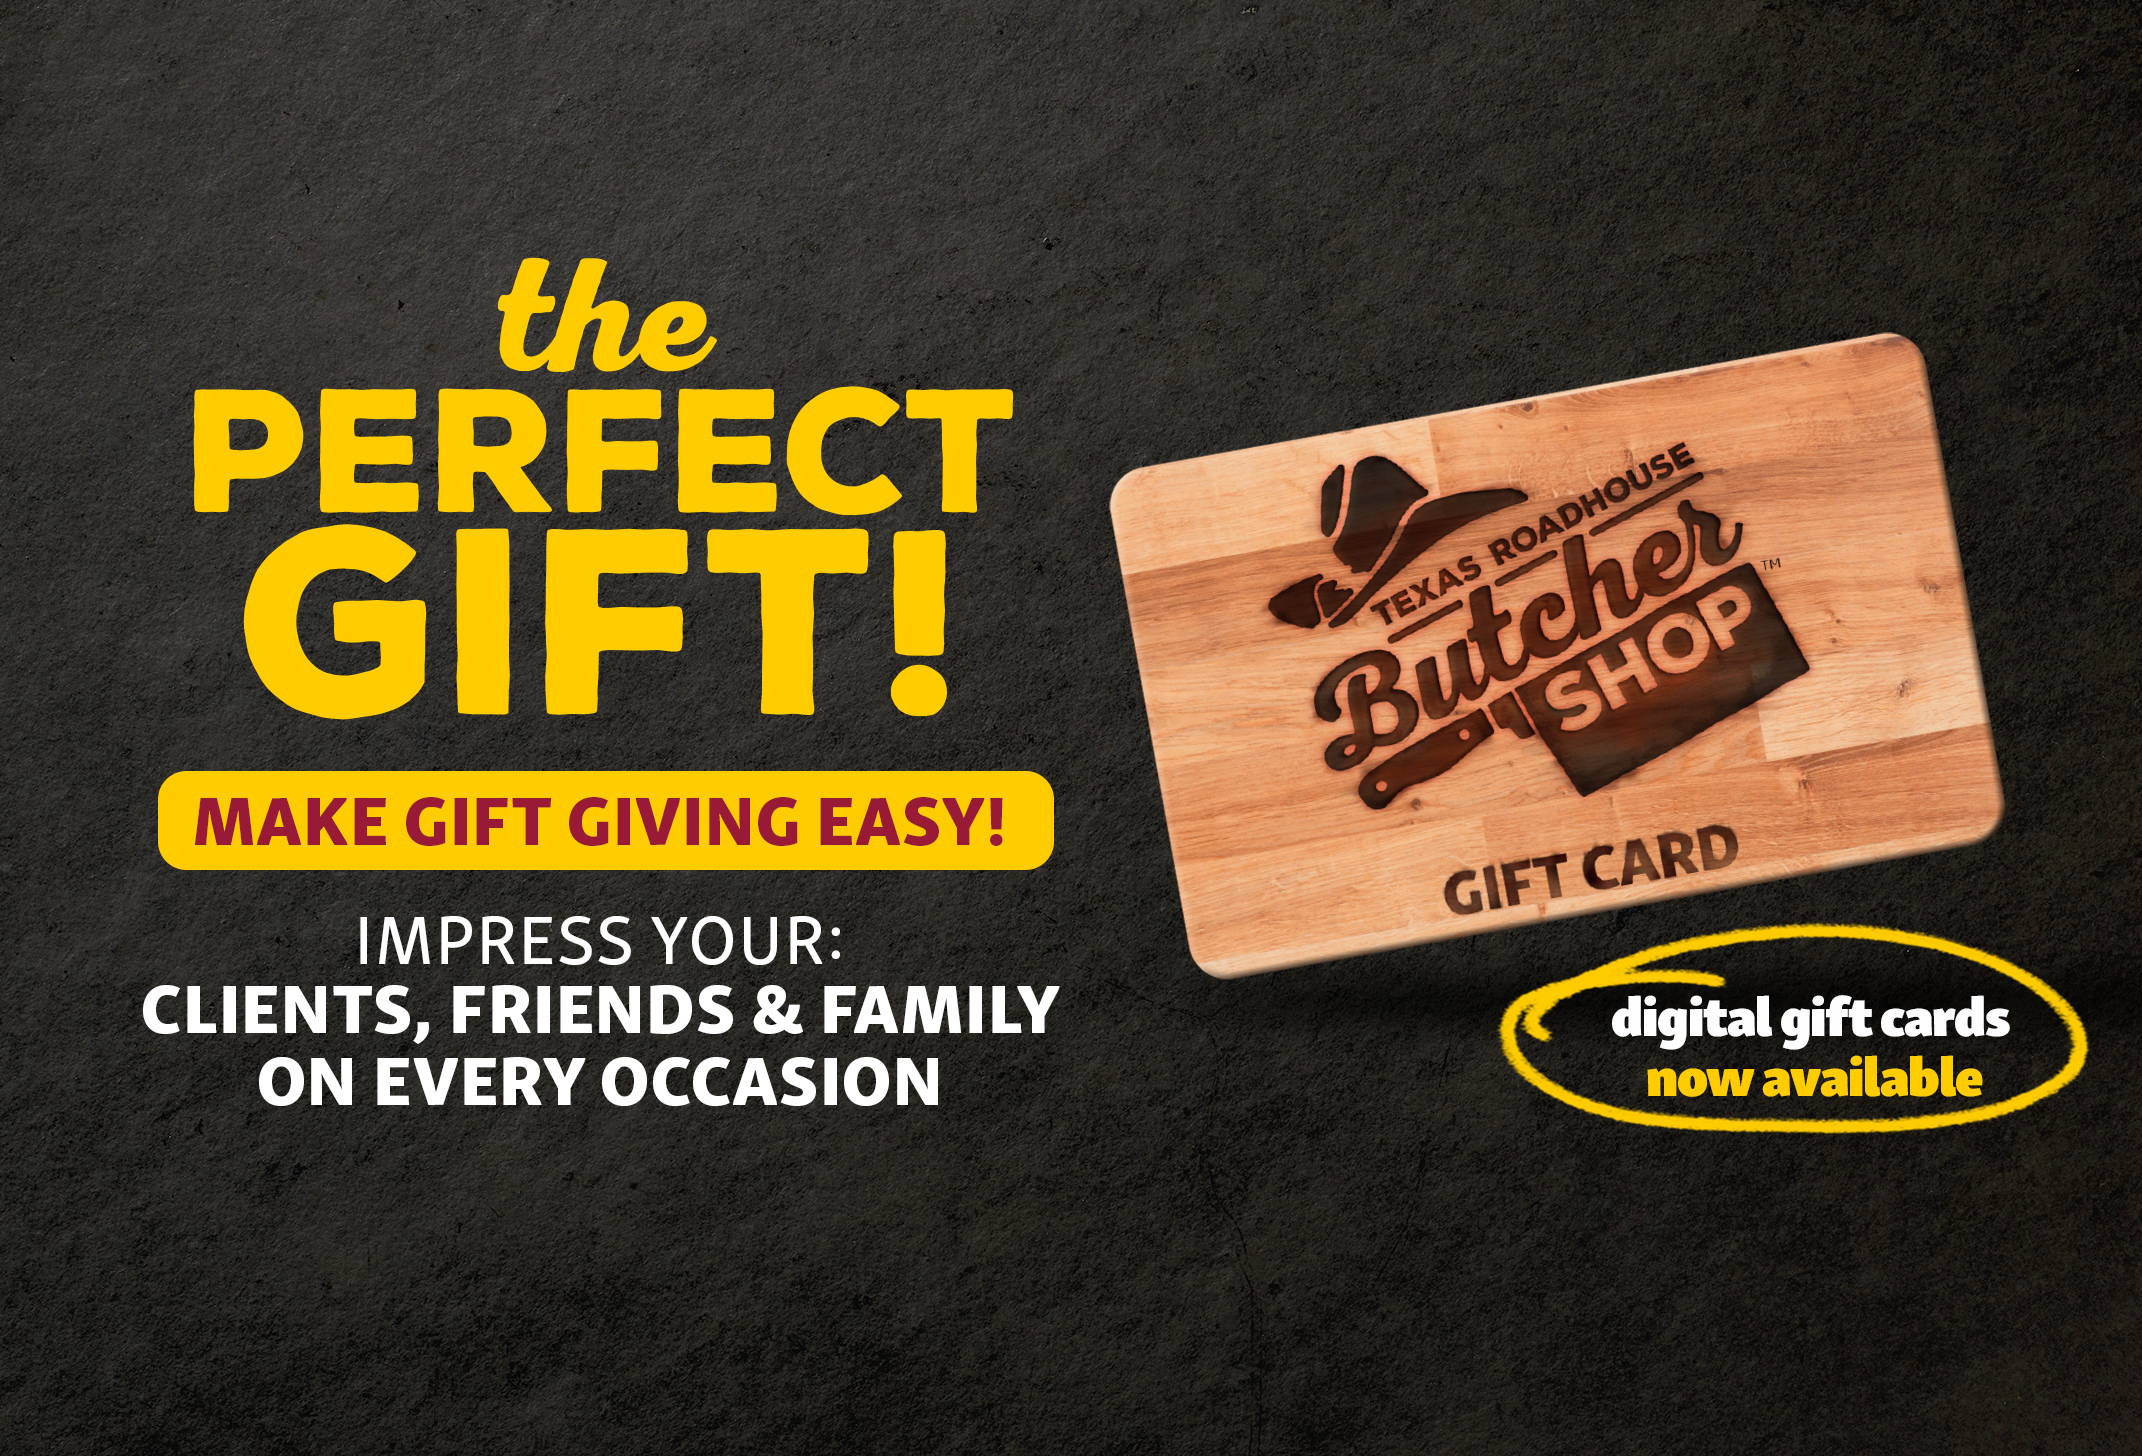 Gift Cards - The perfect gift!